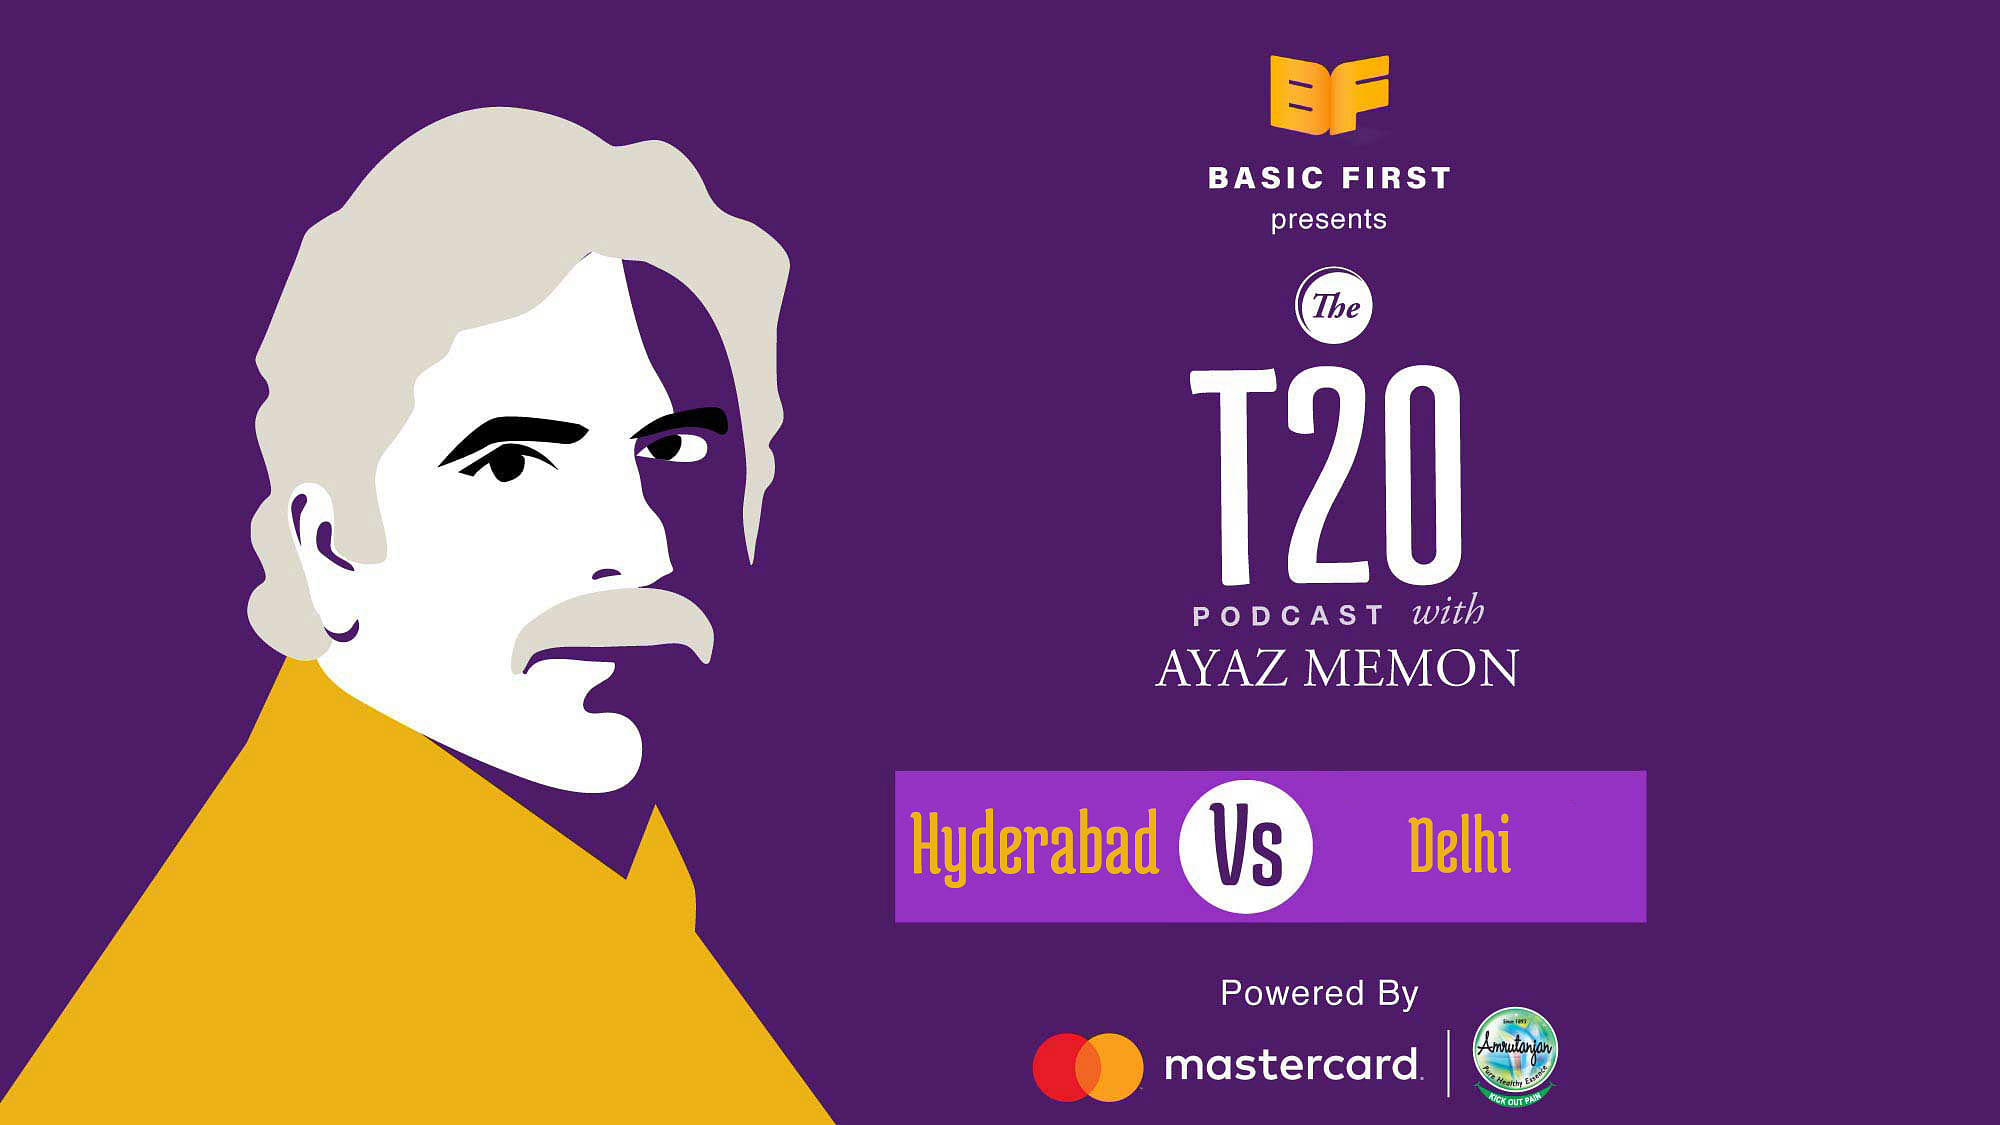 On Episode 47 of The T20 Podcast, Ayaz Memon and I discuss Hyderabad’s big 88-run win over Delhi.